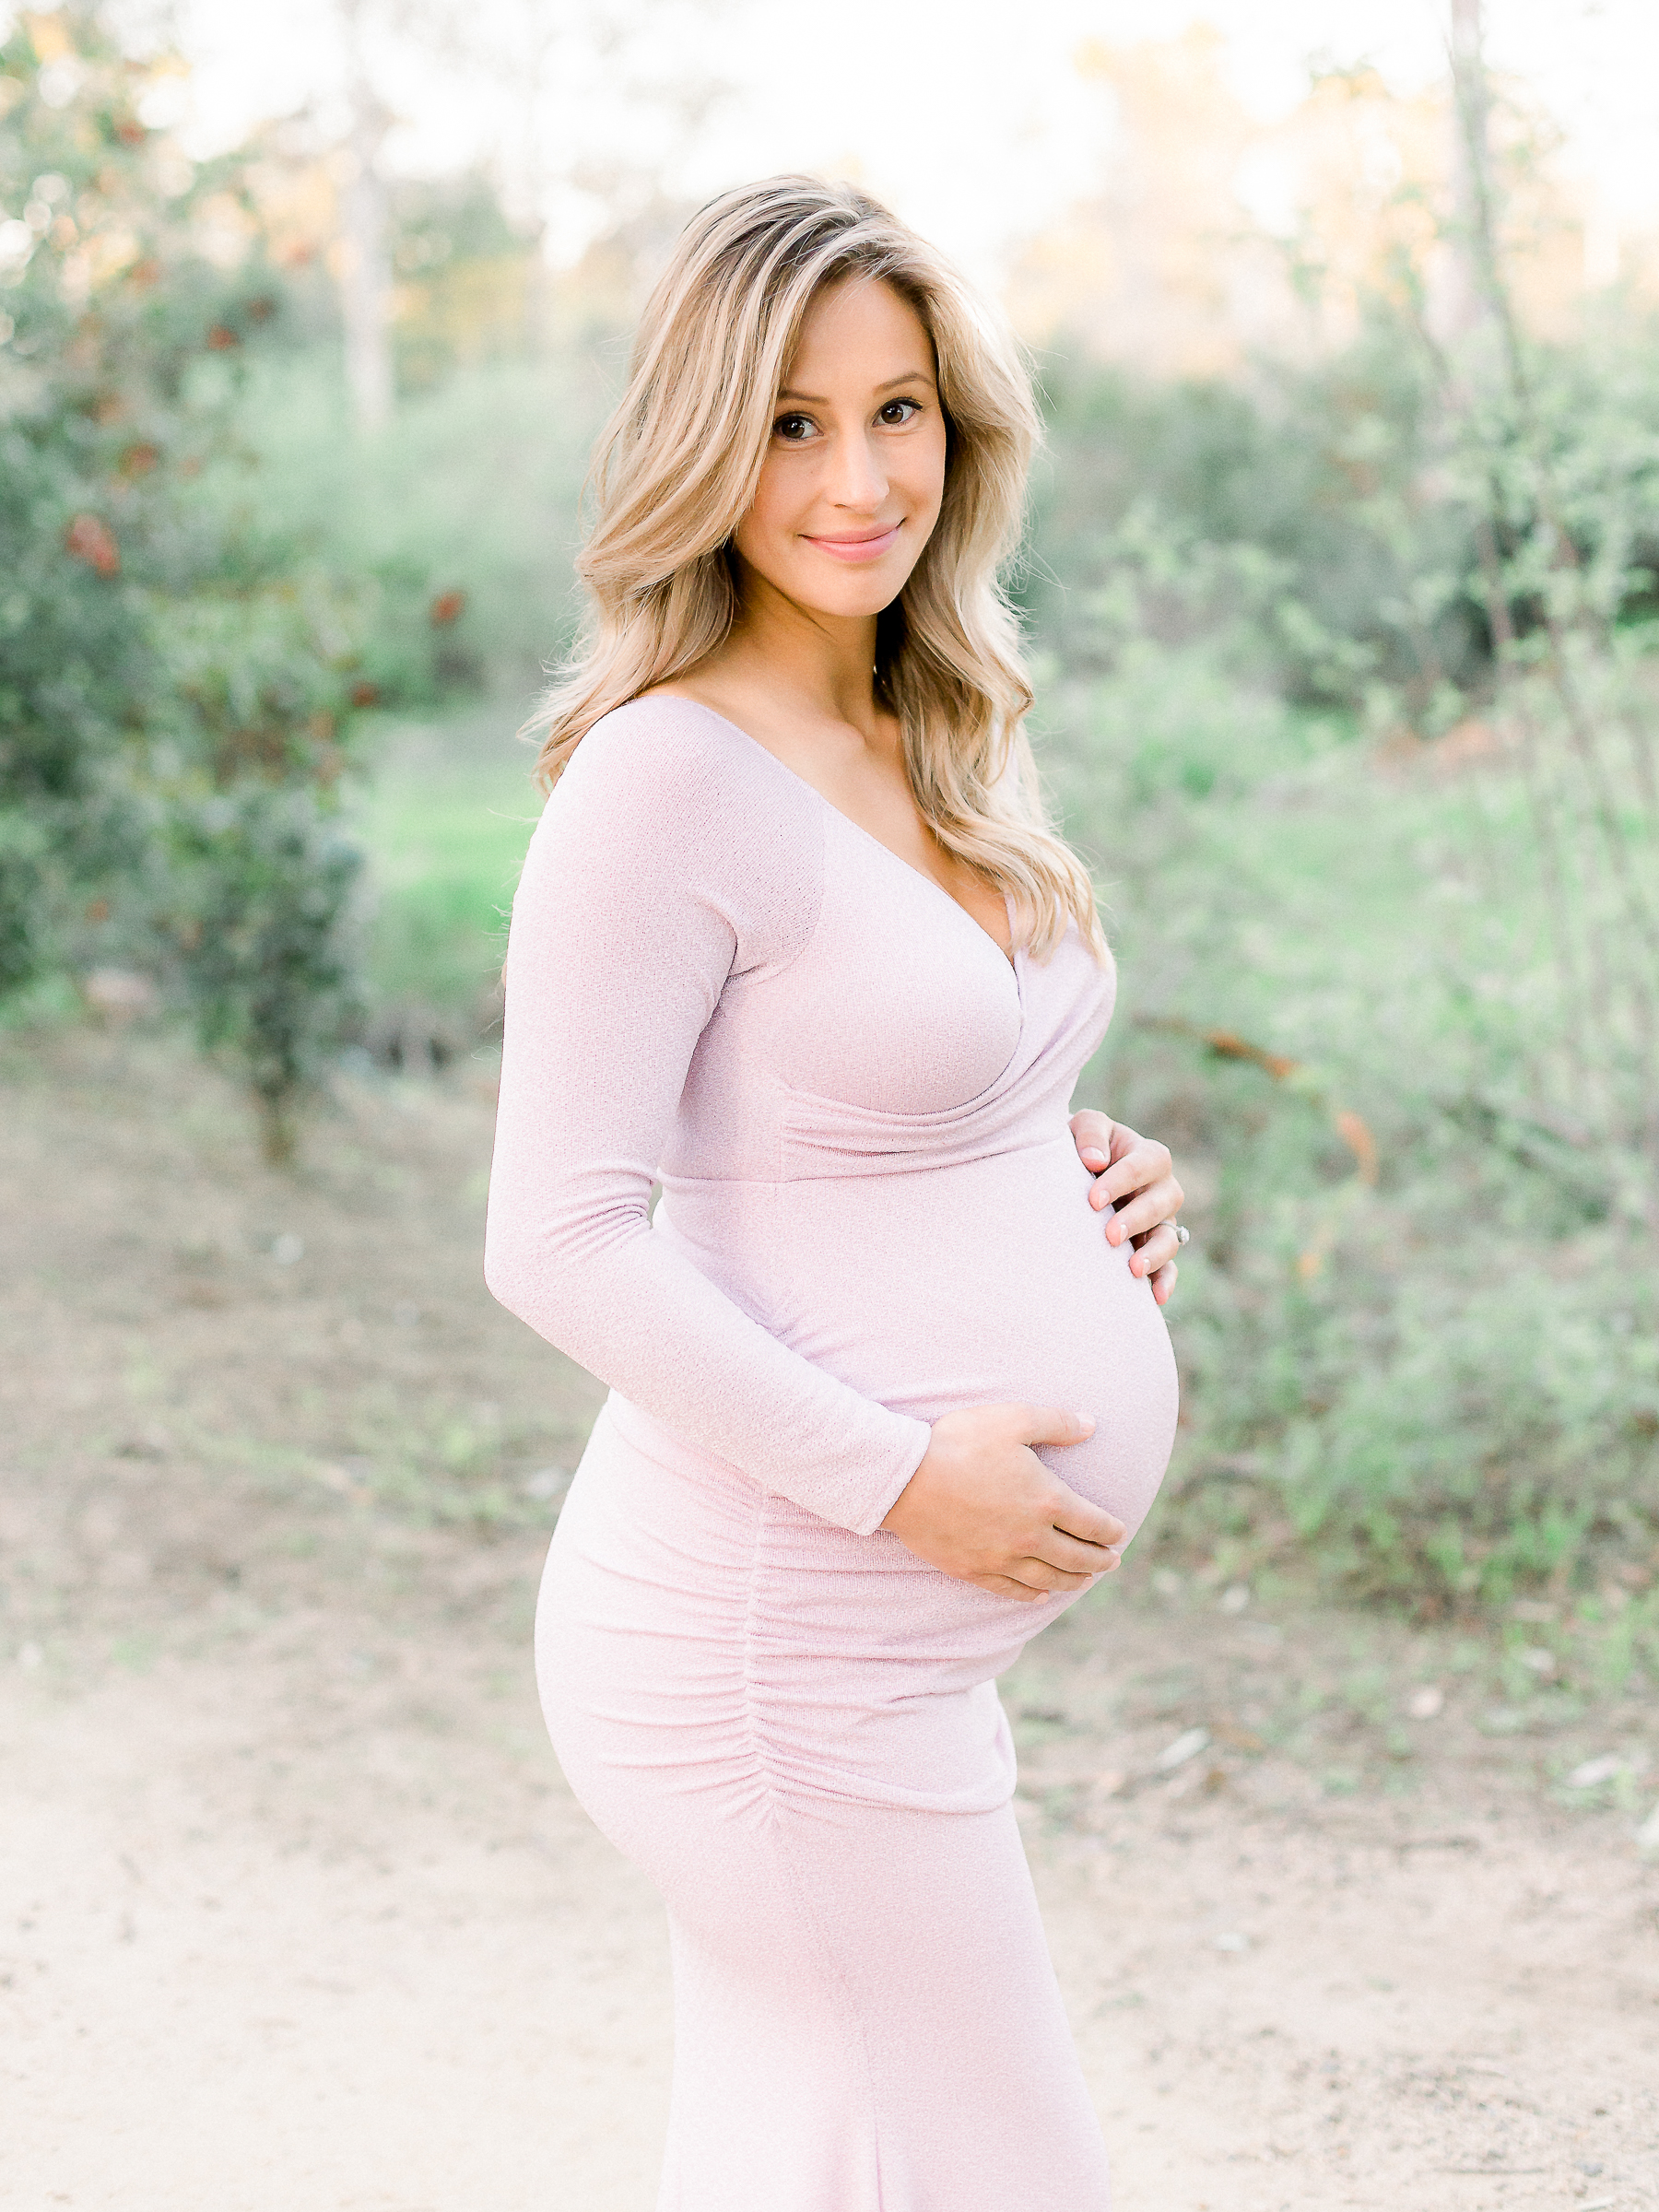 Expecting mom smiling during her maternity photo session